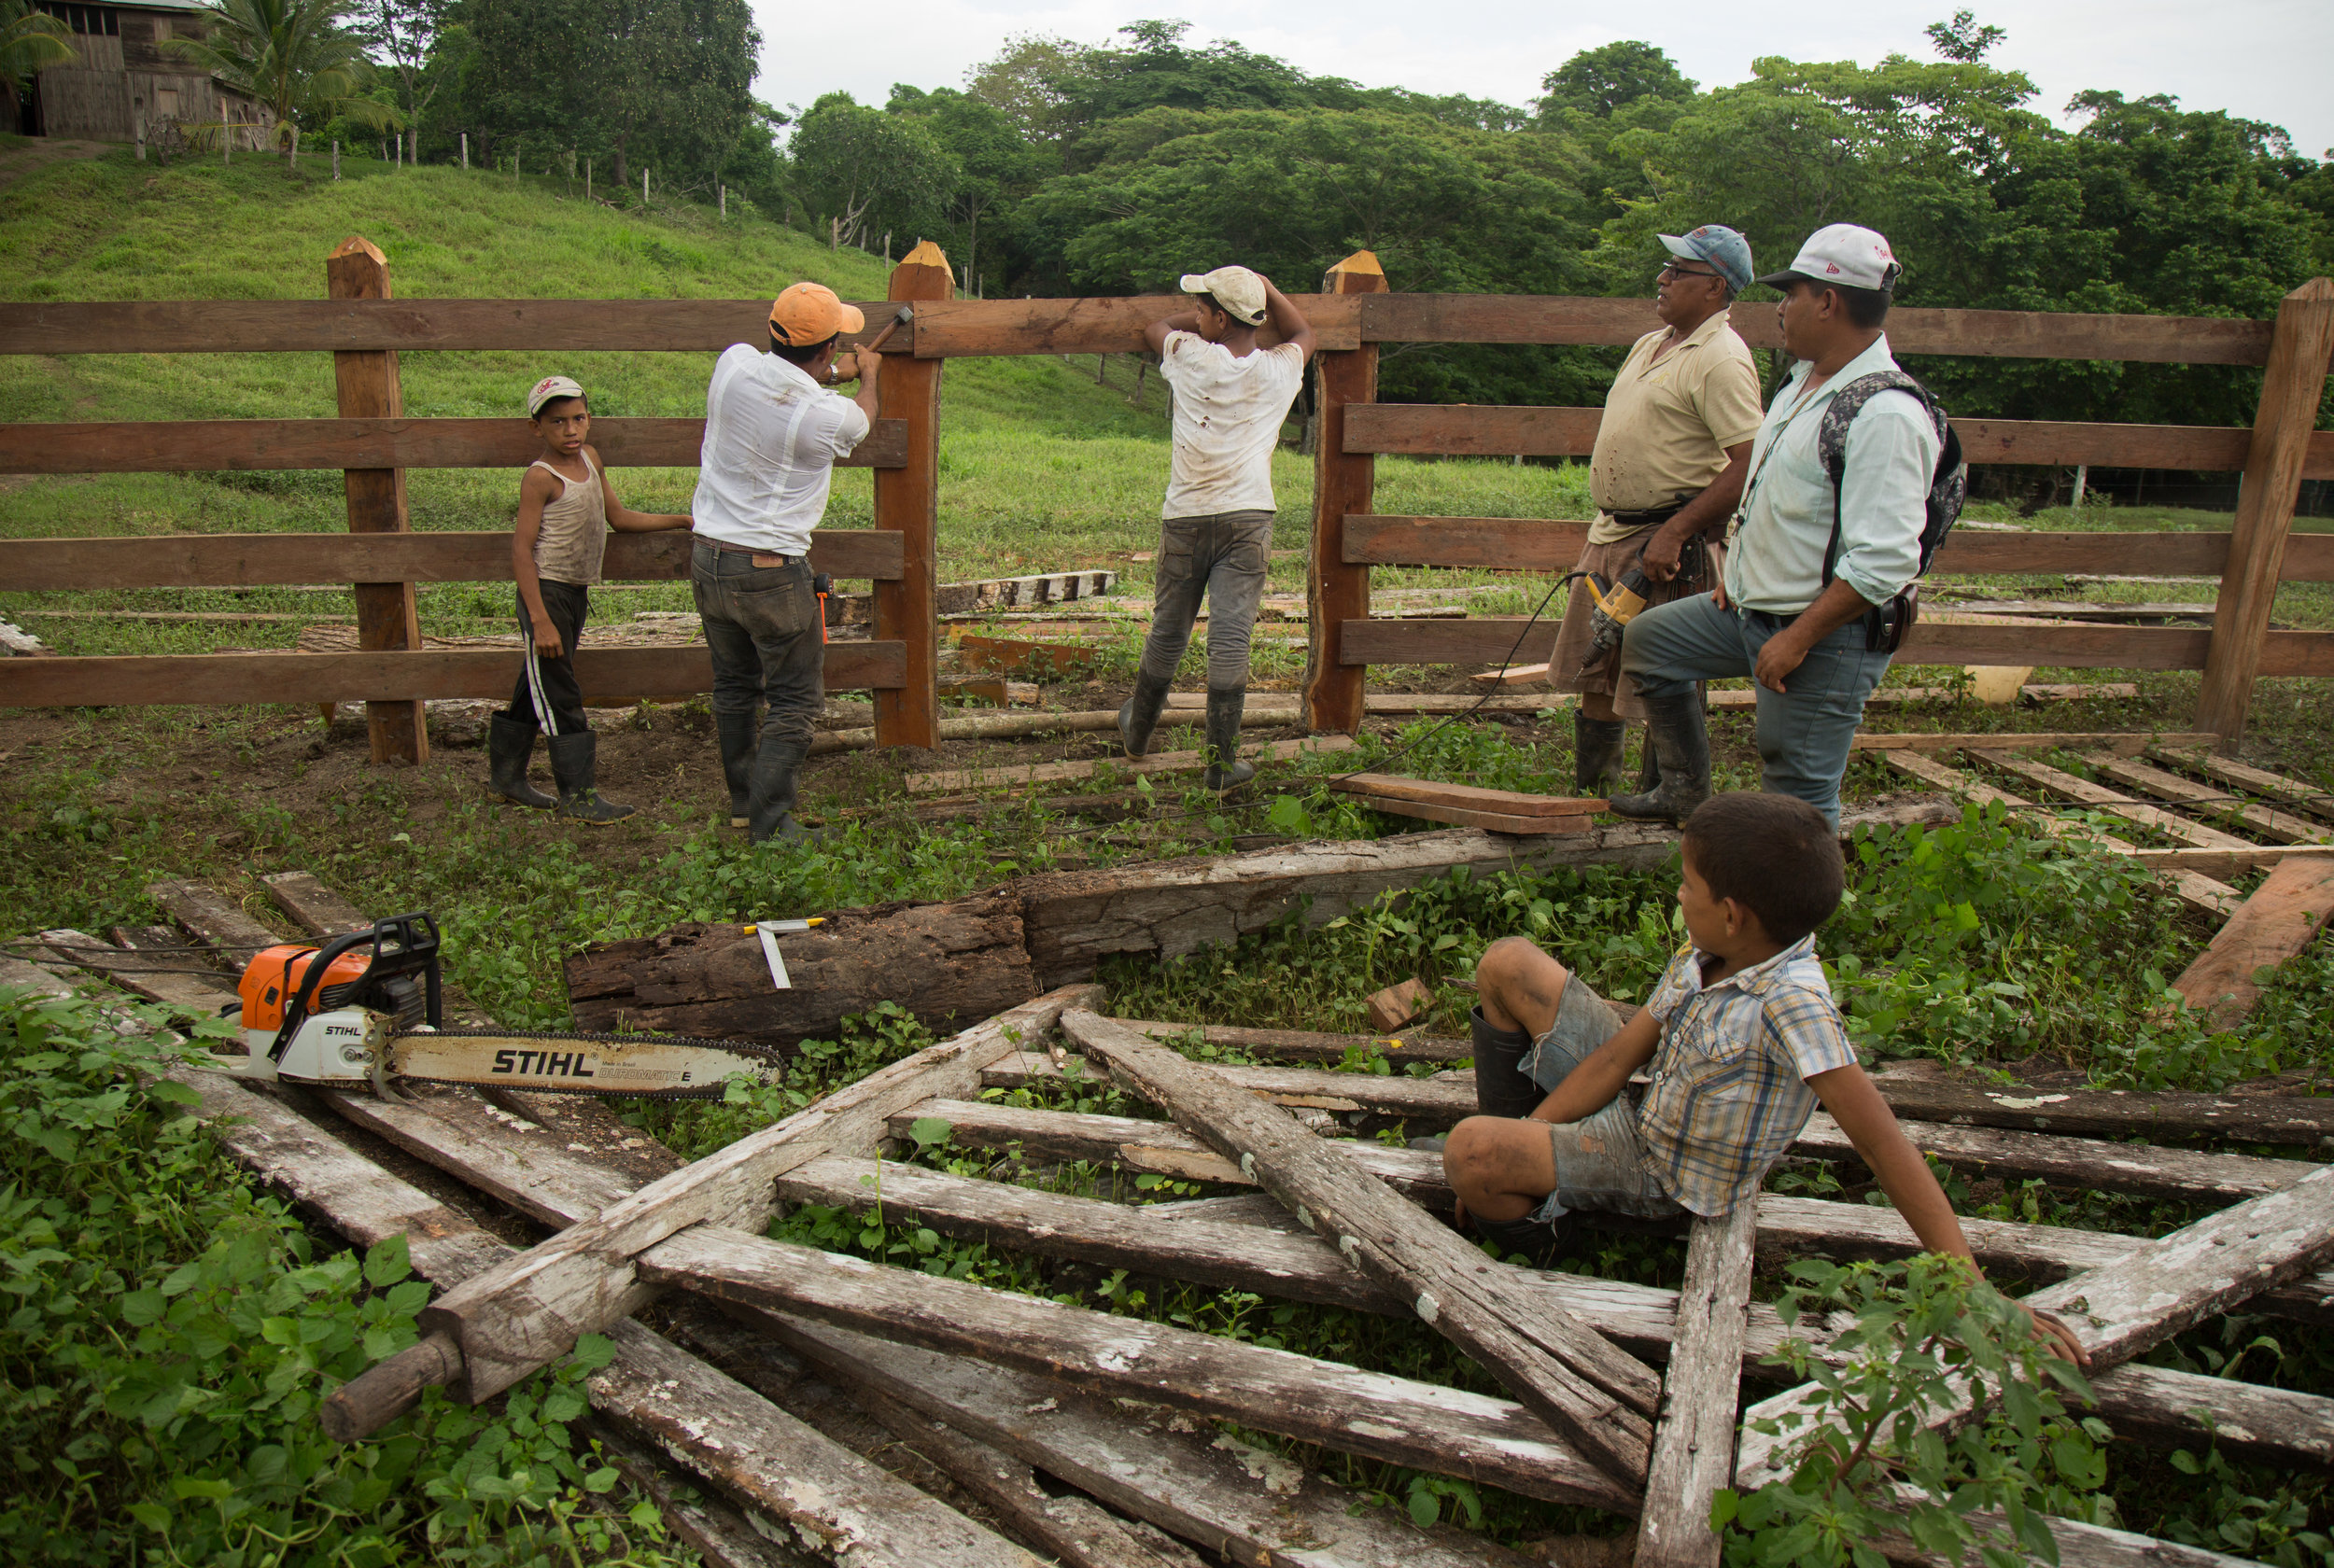  Manuel Aviles working on his farm with his sons. On December 24, 2015 while participating in an anti canal protest in El Tule, he was arrested and taken to El Chipote prison in Managua, where he was beaten by police. Taken in &nbsp;El Jicaro, RAAS, 